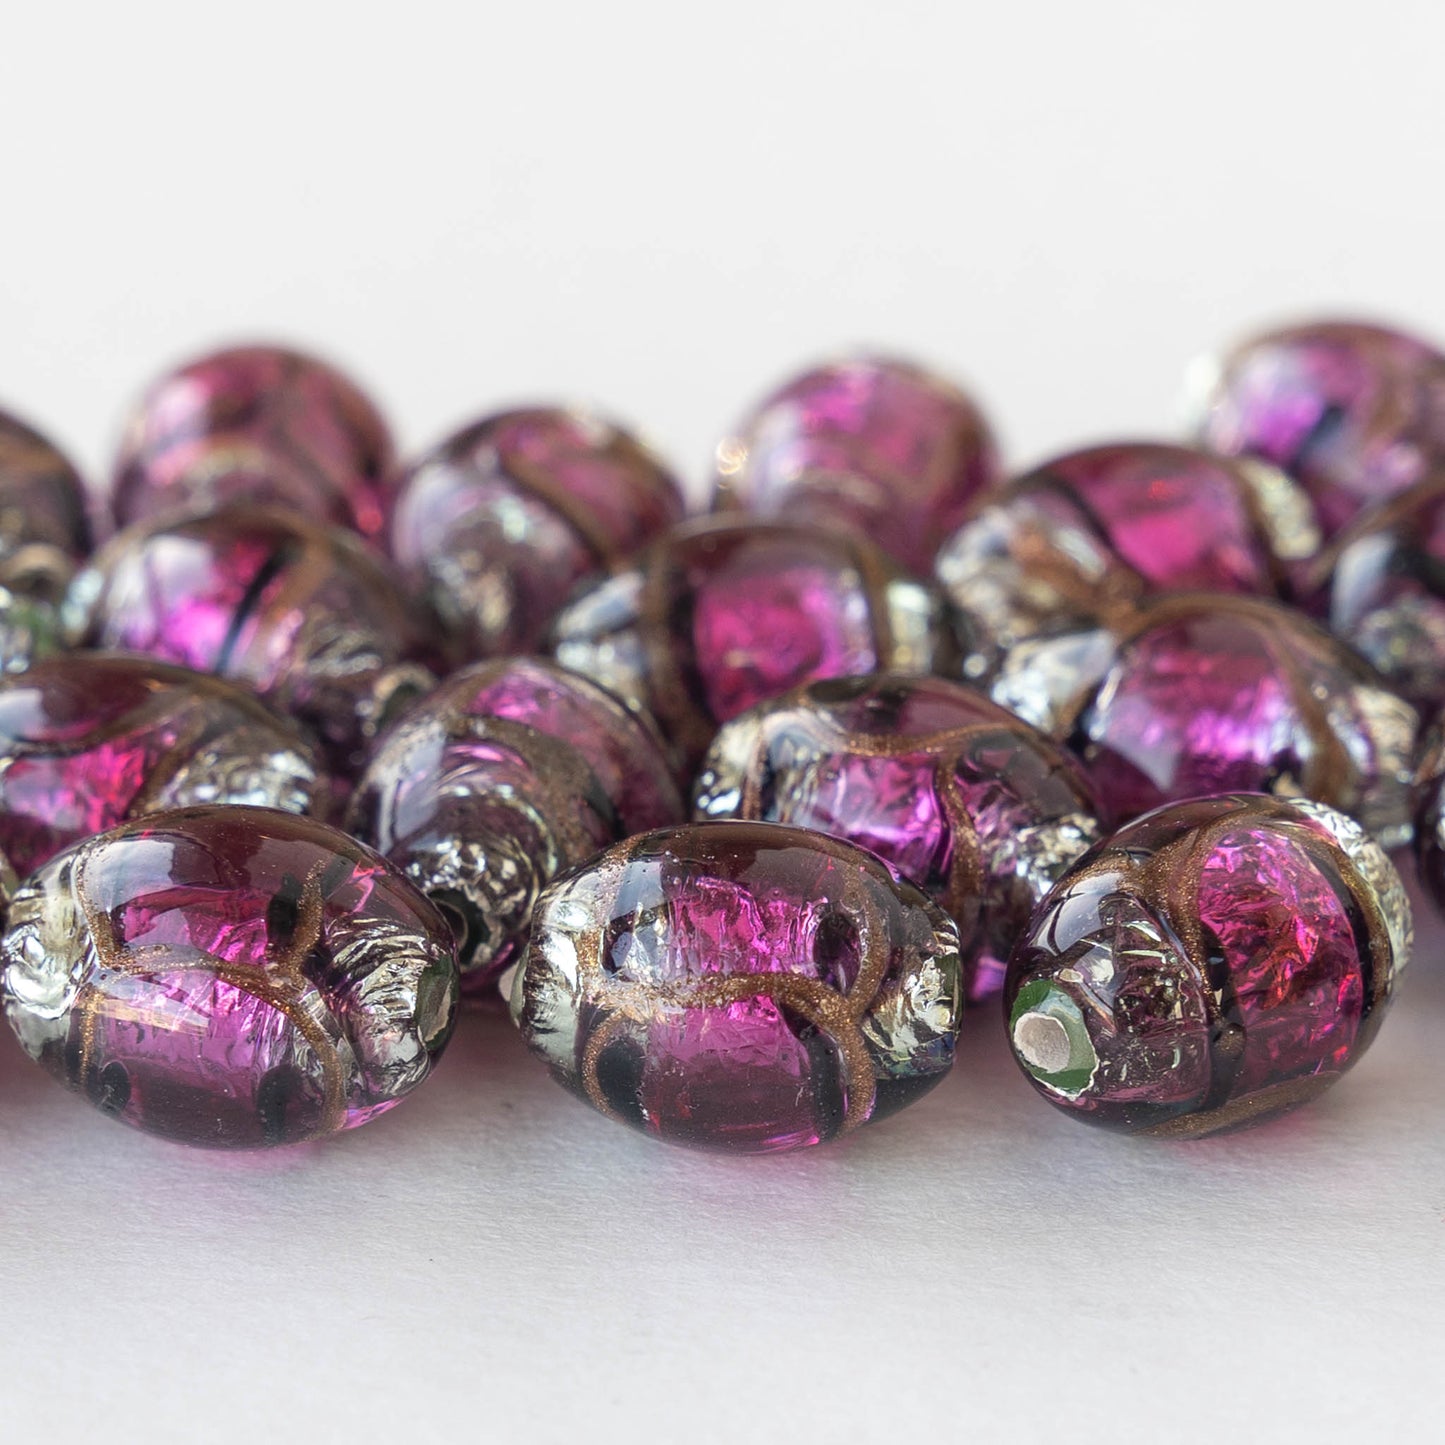 Load image into Gallery viewer, 10x15mm Handmade Oval Lampwork Foil Beads - Violet - 2,4 or 8
